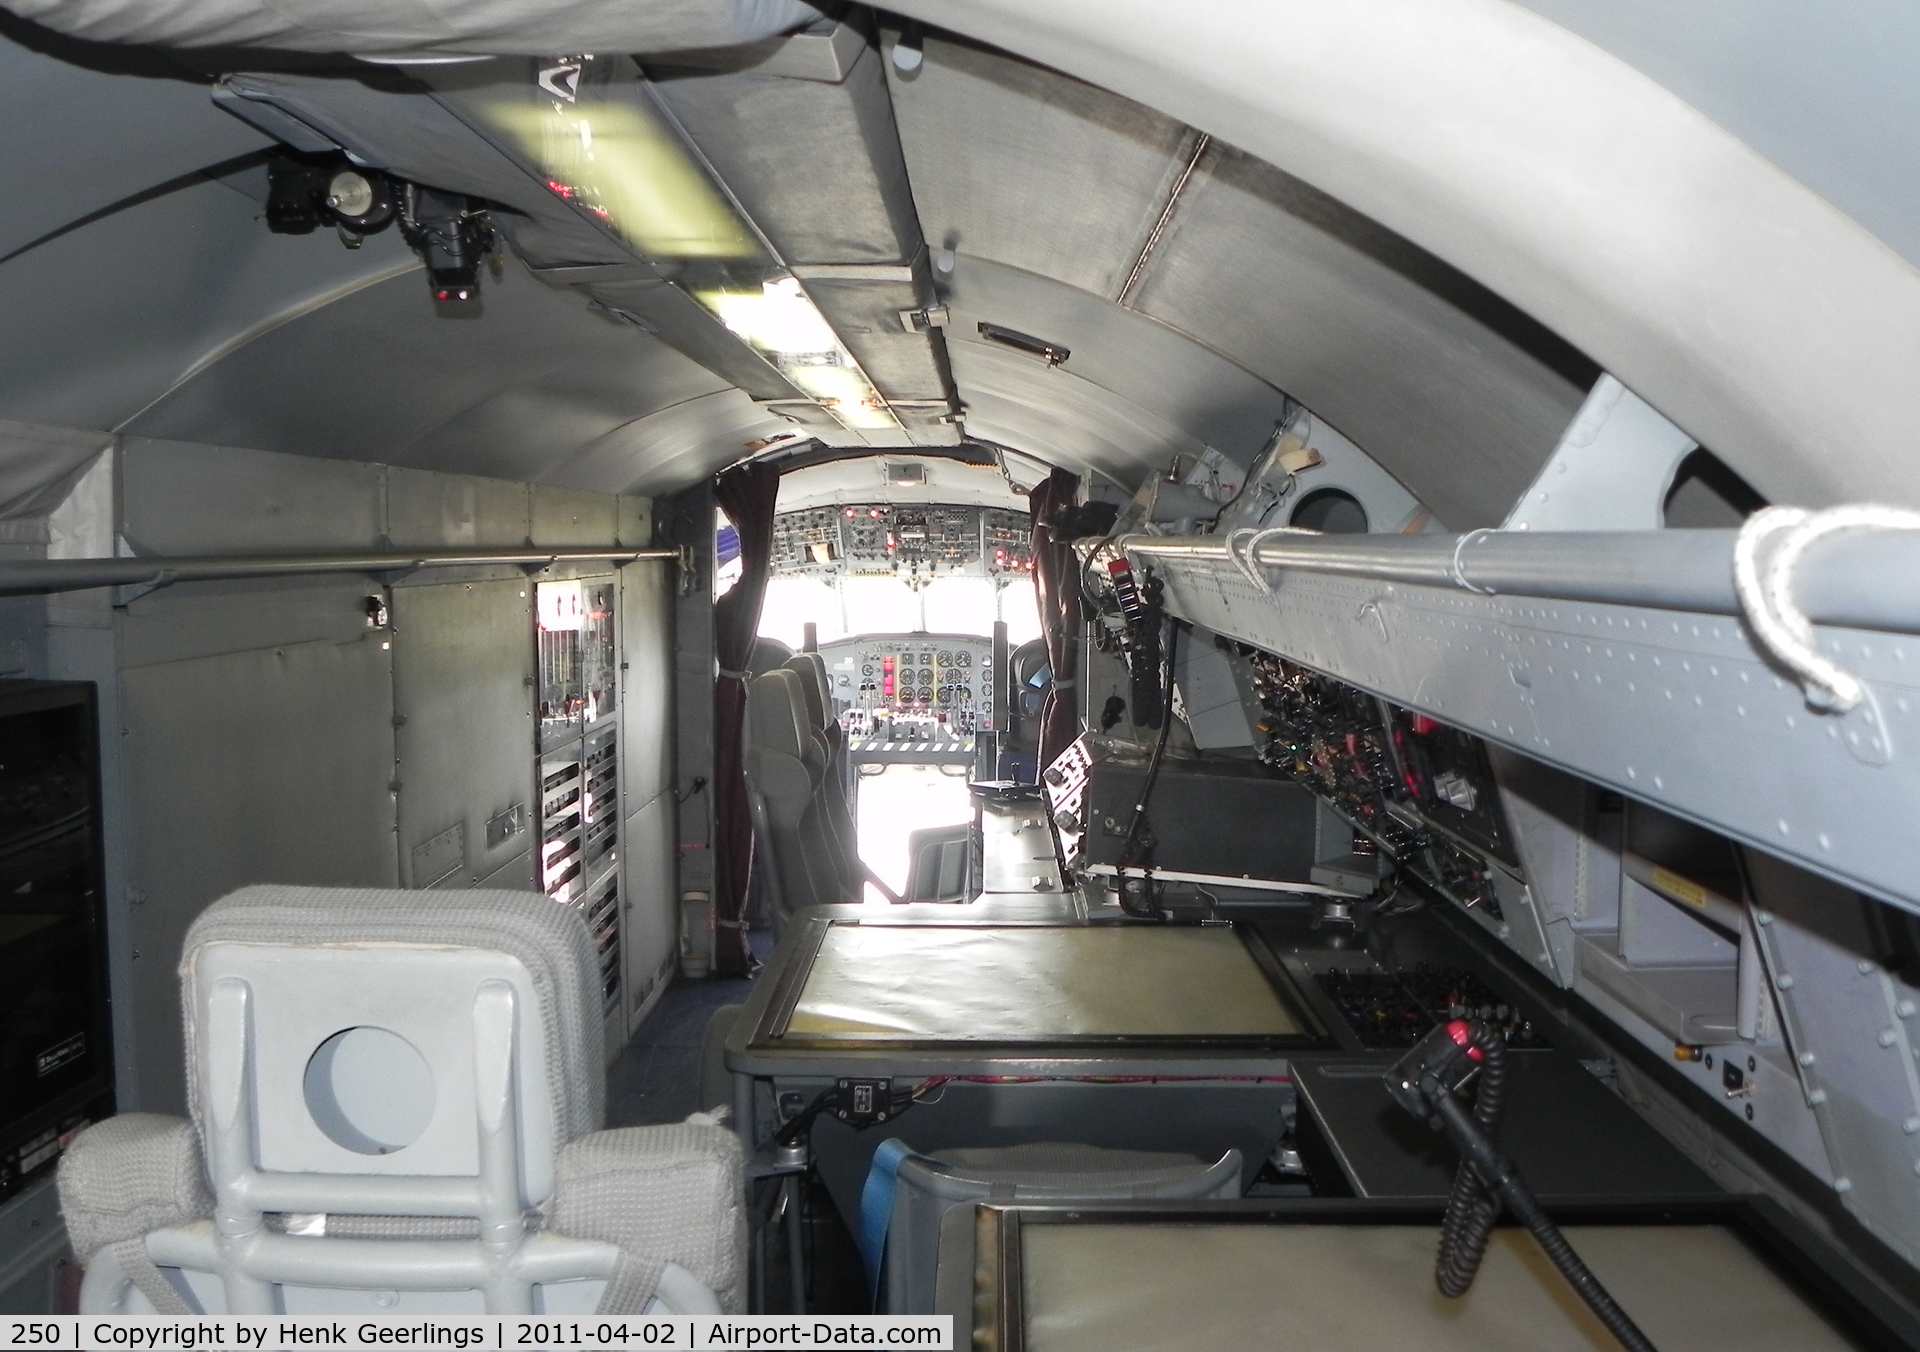 250, Breguet SP-13A Atlantic C/N 55, Interior of the Atlantique.
Royal Dutch Navy.
Was based at Valkenburg now in the Aviation Museum at Soesterberg